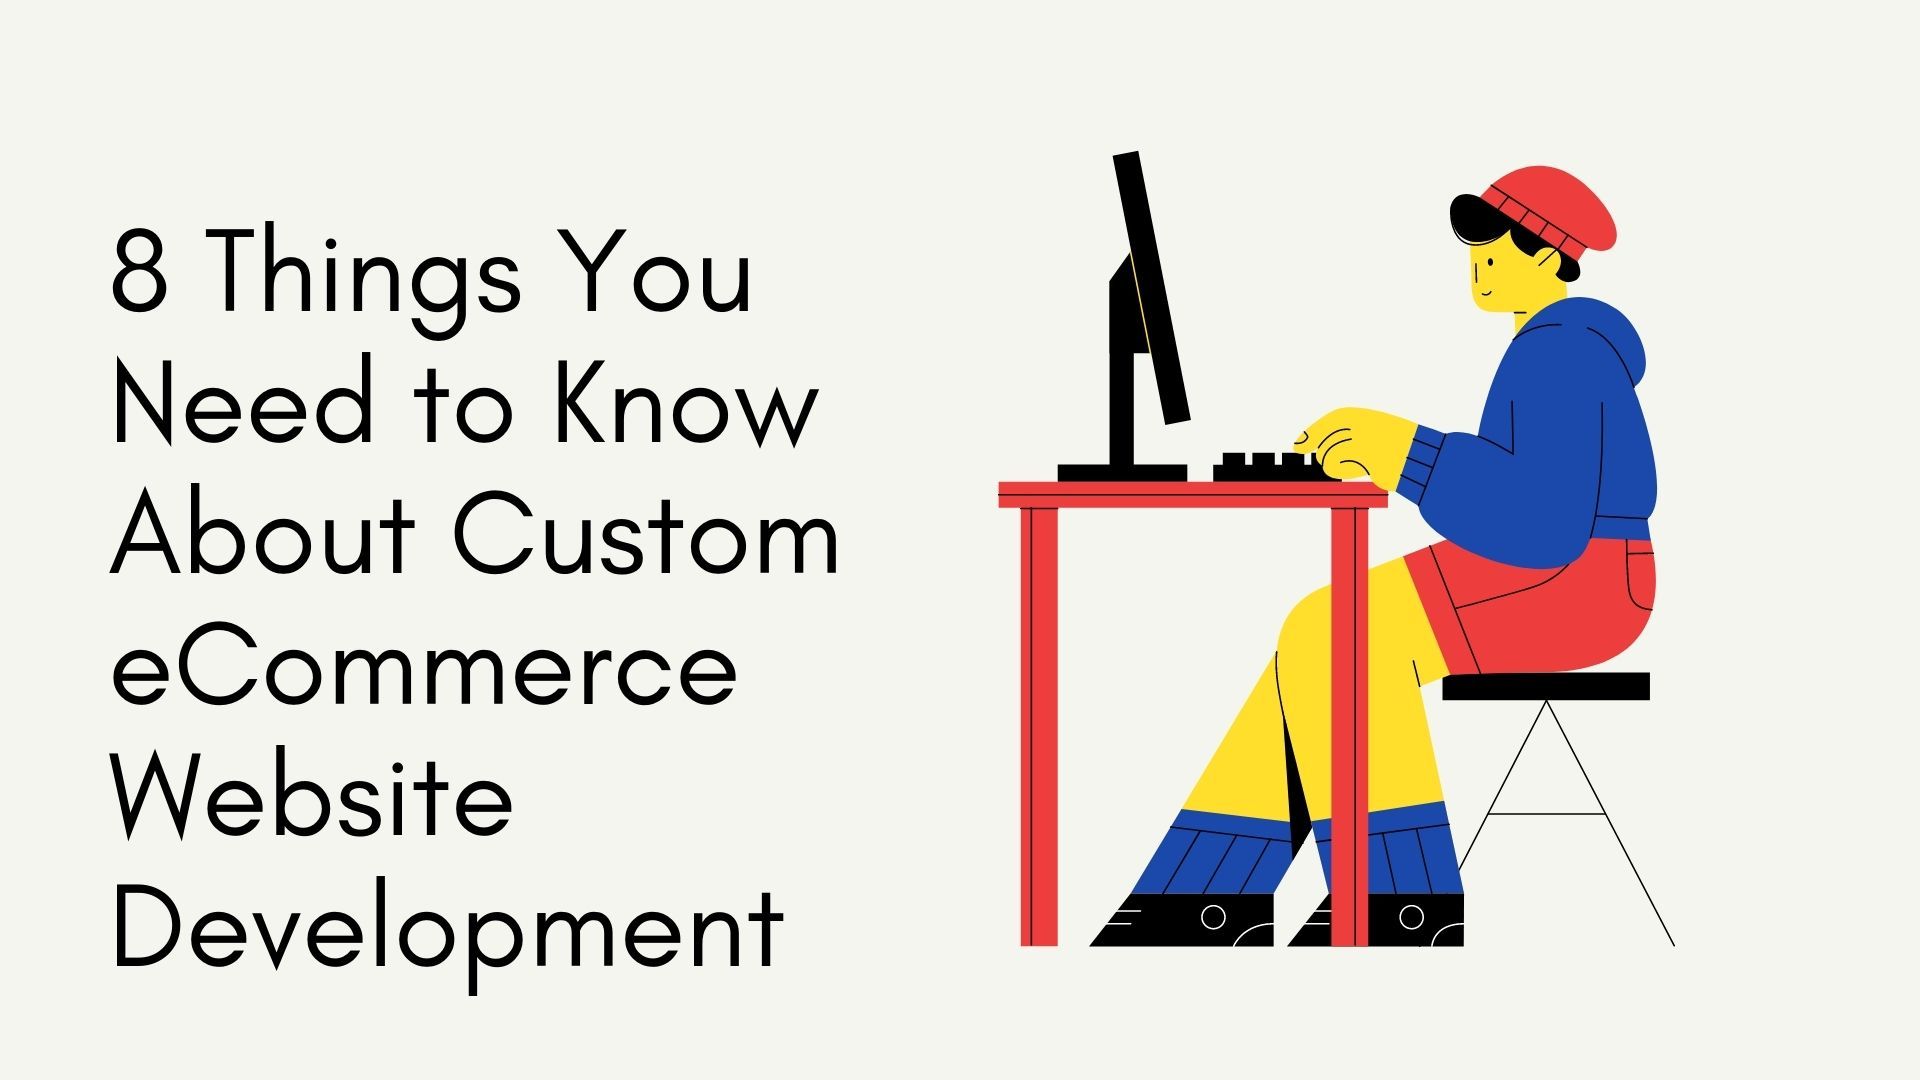 8 Things You Need to Know About Custom eCommerce Website Development